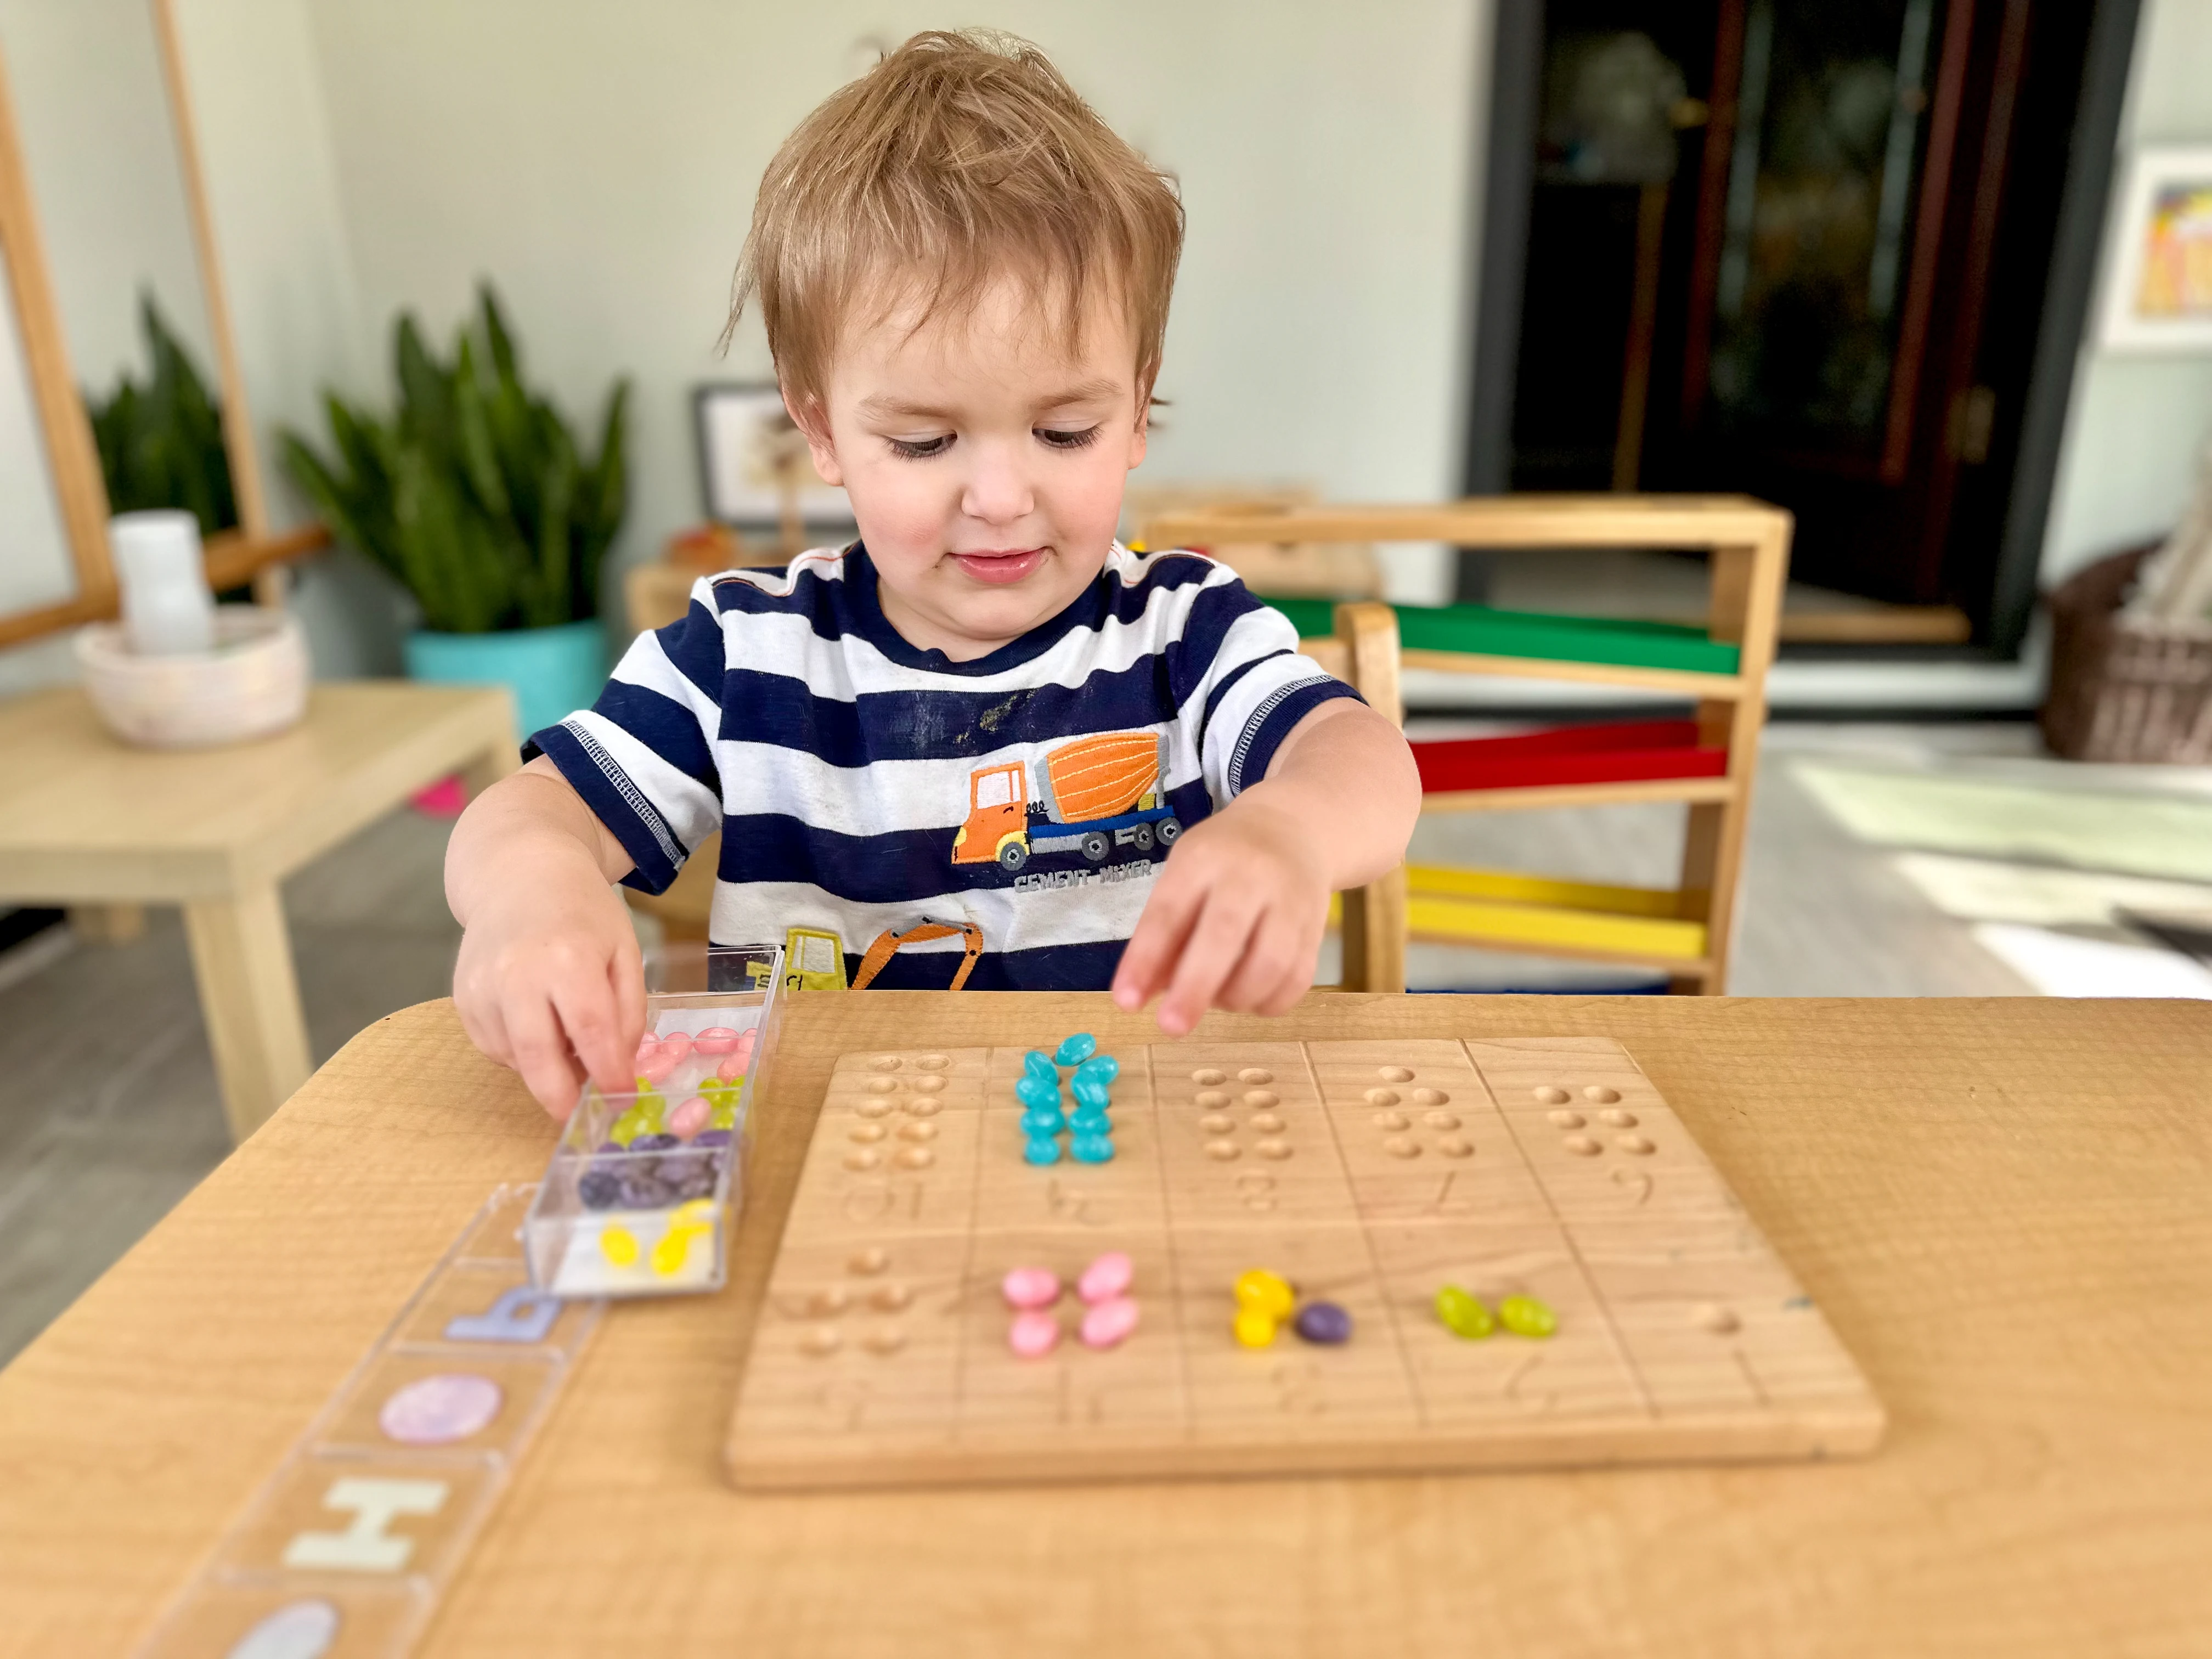 Montessori toddler uses wooden board to count jelly beans as he learns numbers in his Montessori playroom